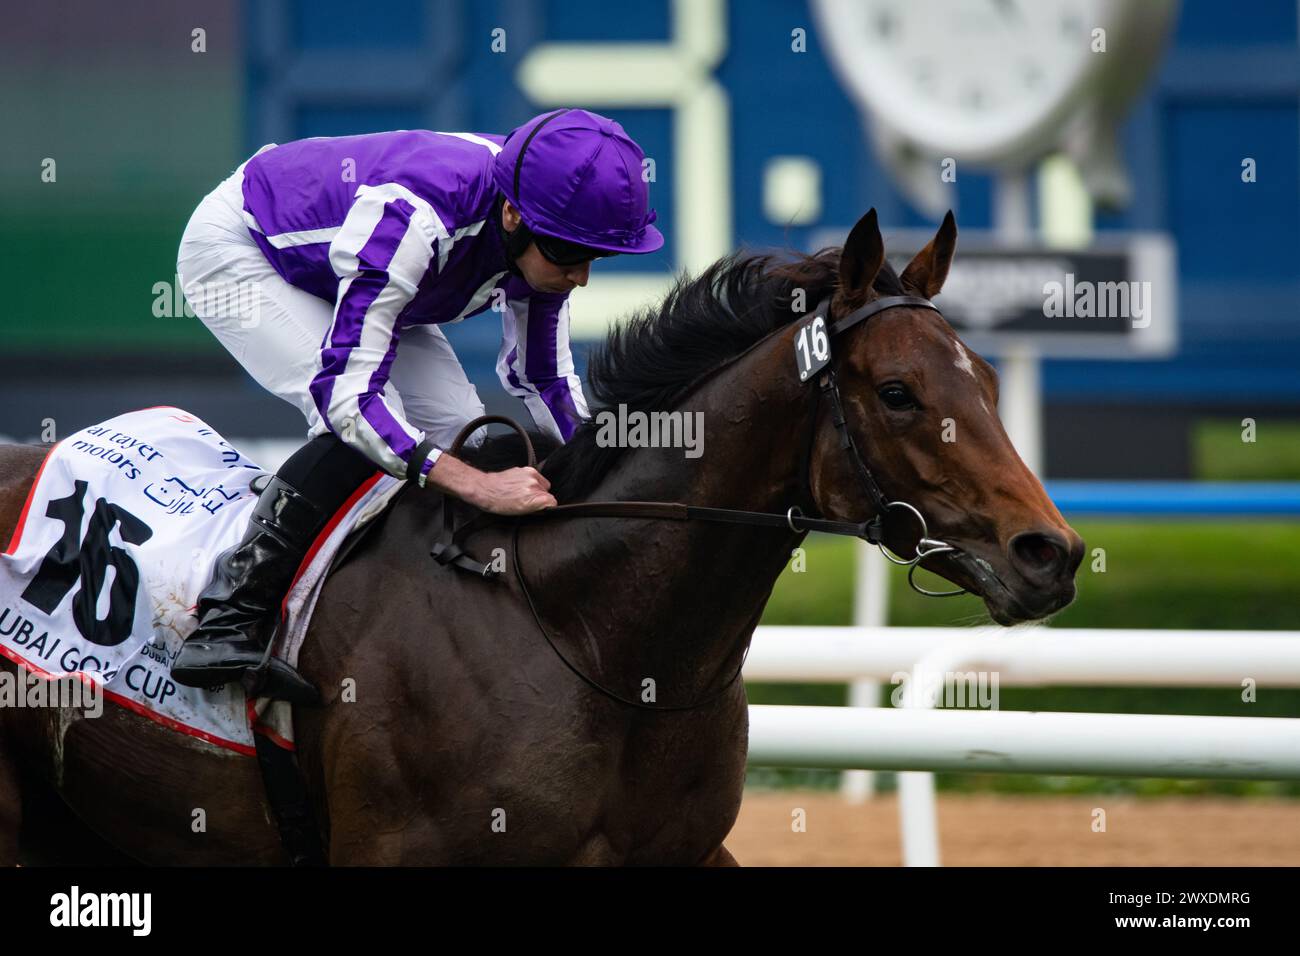 Dubai, United Arab Emirates. Saturday 30th March 2024. Tower of London and jockey Ryan Moore win the 2024 renewal of the Group 2 Dubai Gold Cup sponsored by Al Tayer Motors for trainer Aidan O'Brien and owners Derrick Smith, Michael Tabor, Mrs John Magnier and Westerberg. Credit JTW Equine Images / Alamy Live News Stock Photo